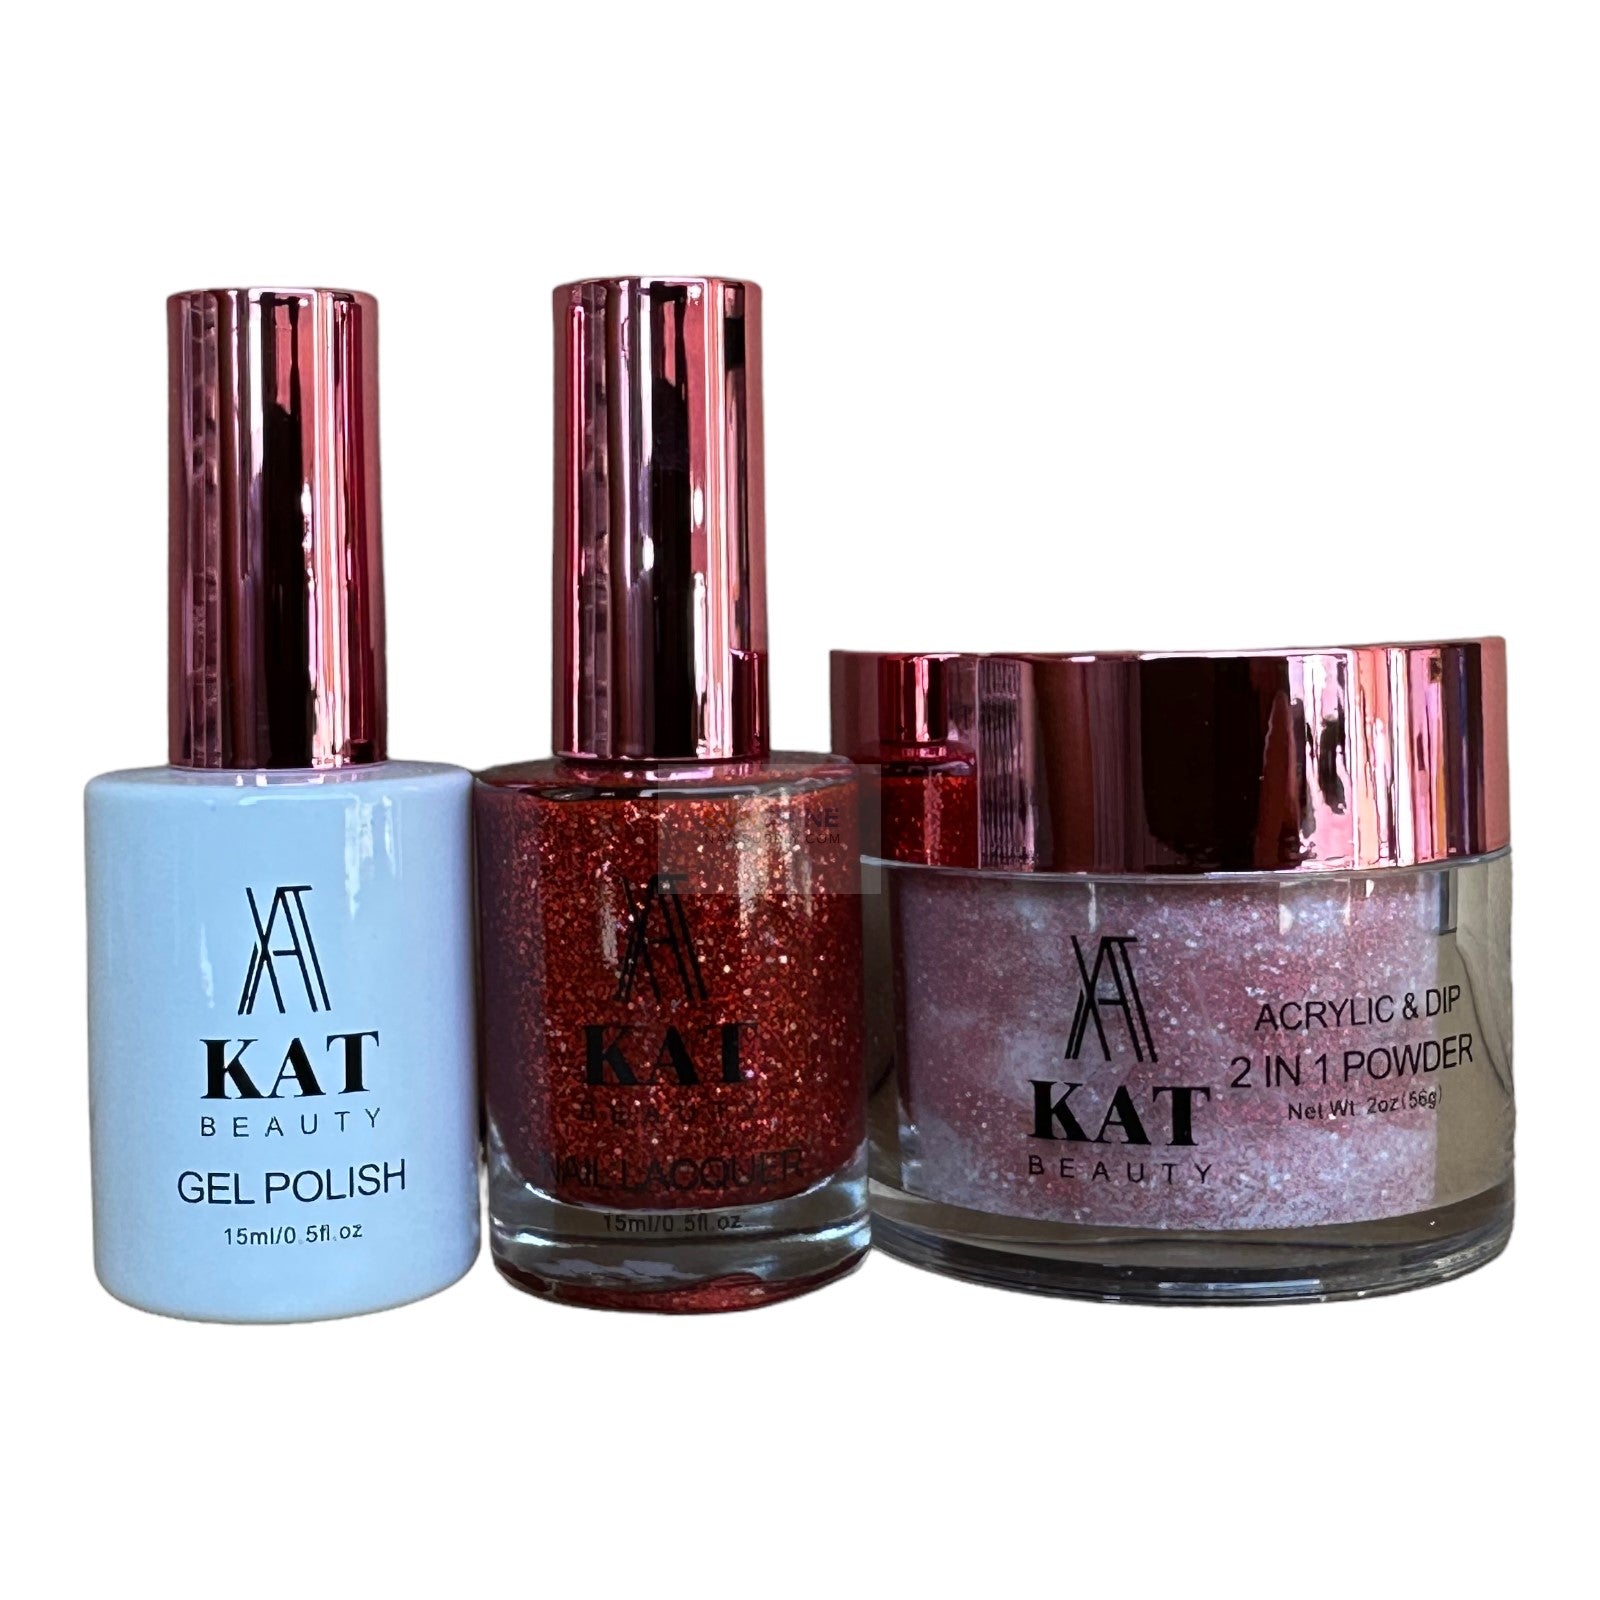 Buy NY Bae Galasexy Nail Lacquer Combo (Set of 4) - Shiny Nebula,  Captivating Orbit, Gliterella, Starry Nights Online at Low Prices in India  - Amazon.in